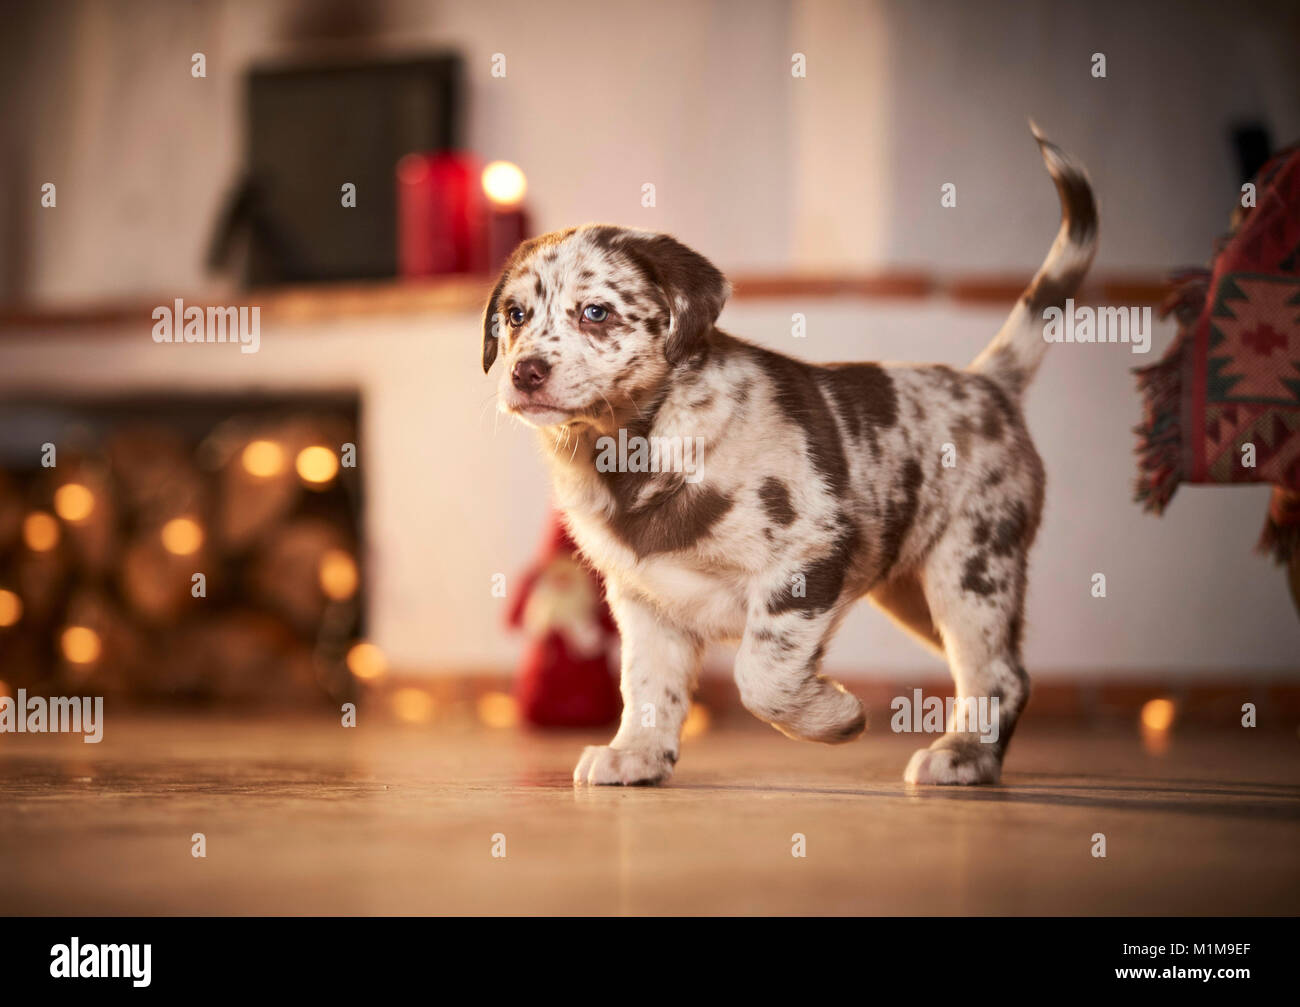 Mixed-breed dog. Puppy walking in a room decorated for Christmas. Germany. Stock Photo